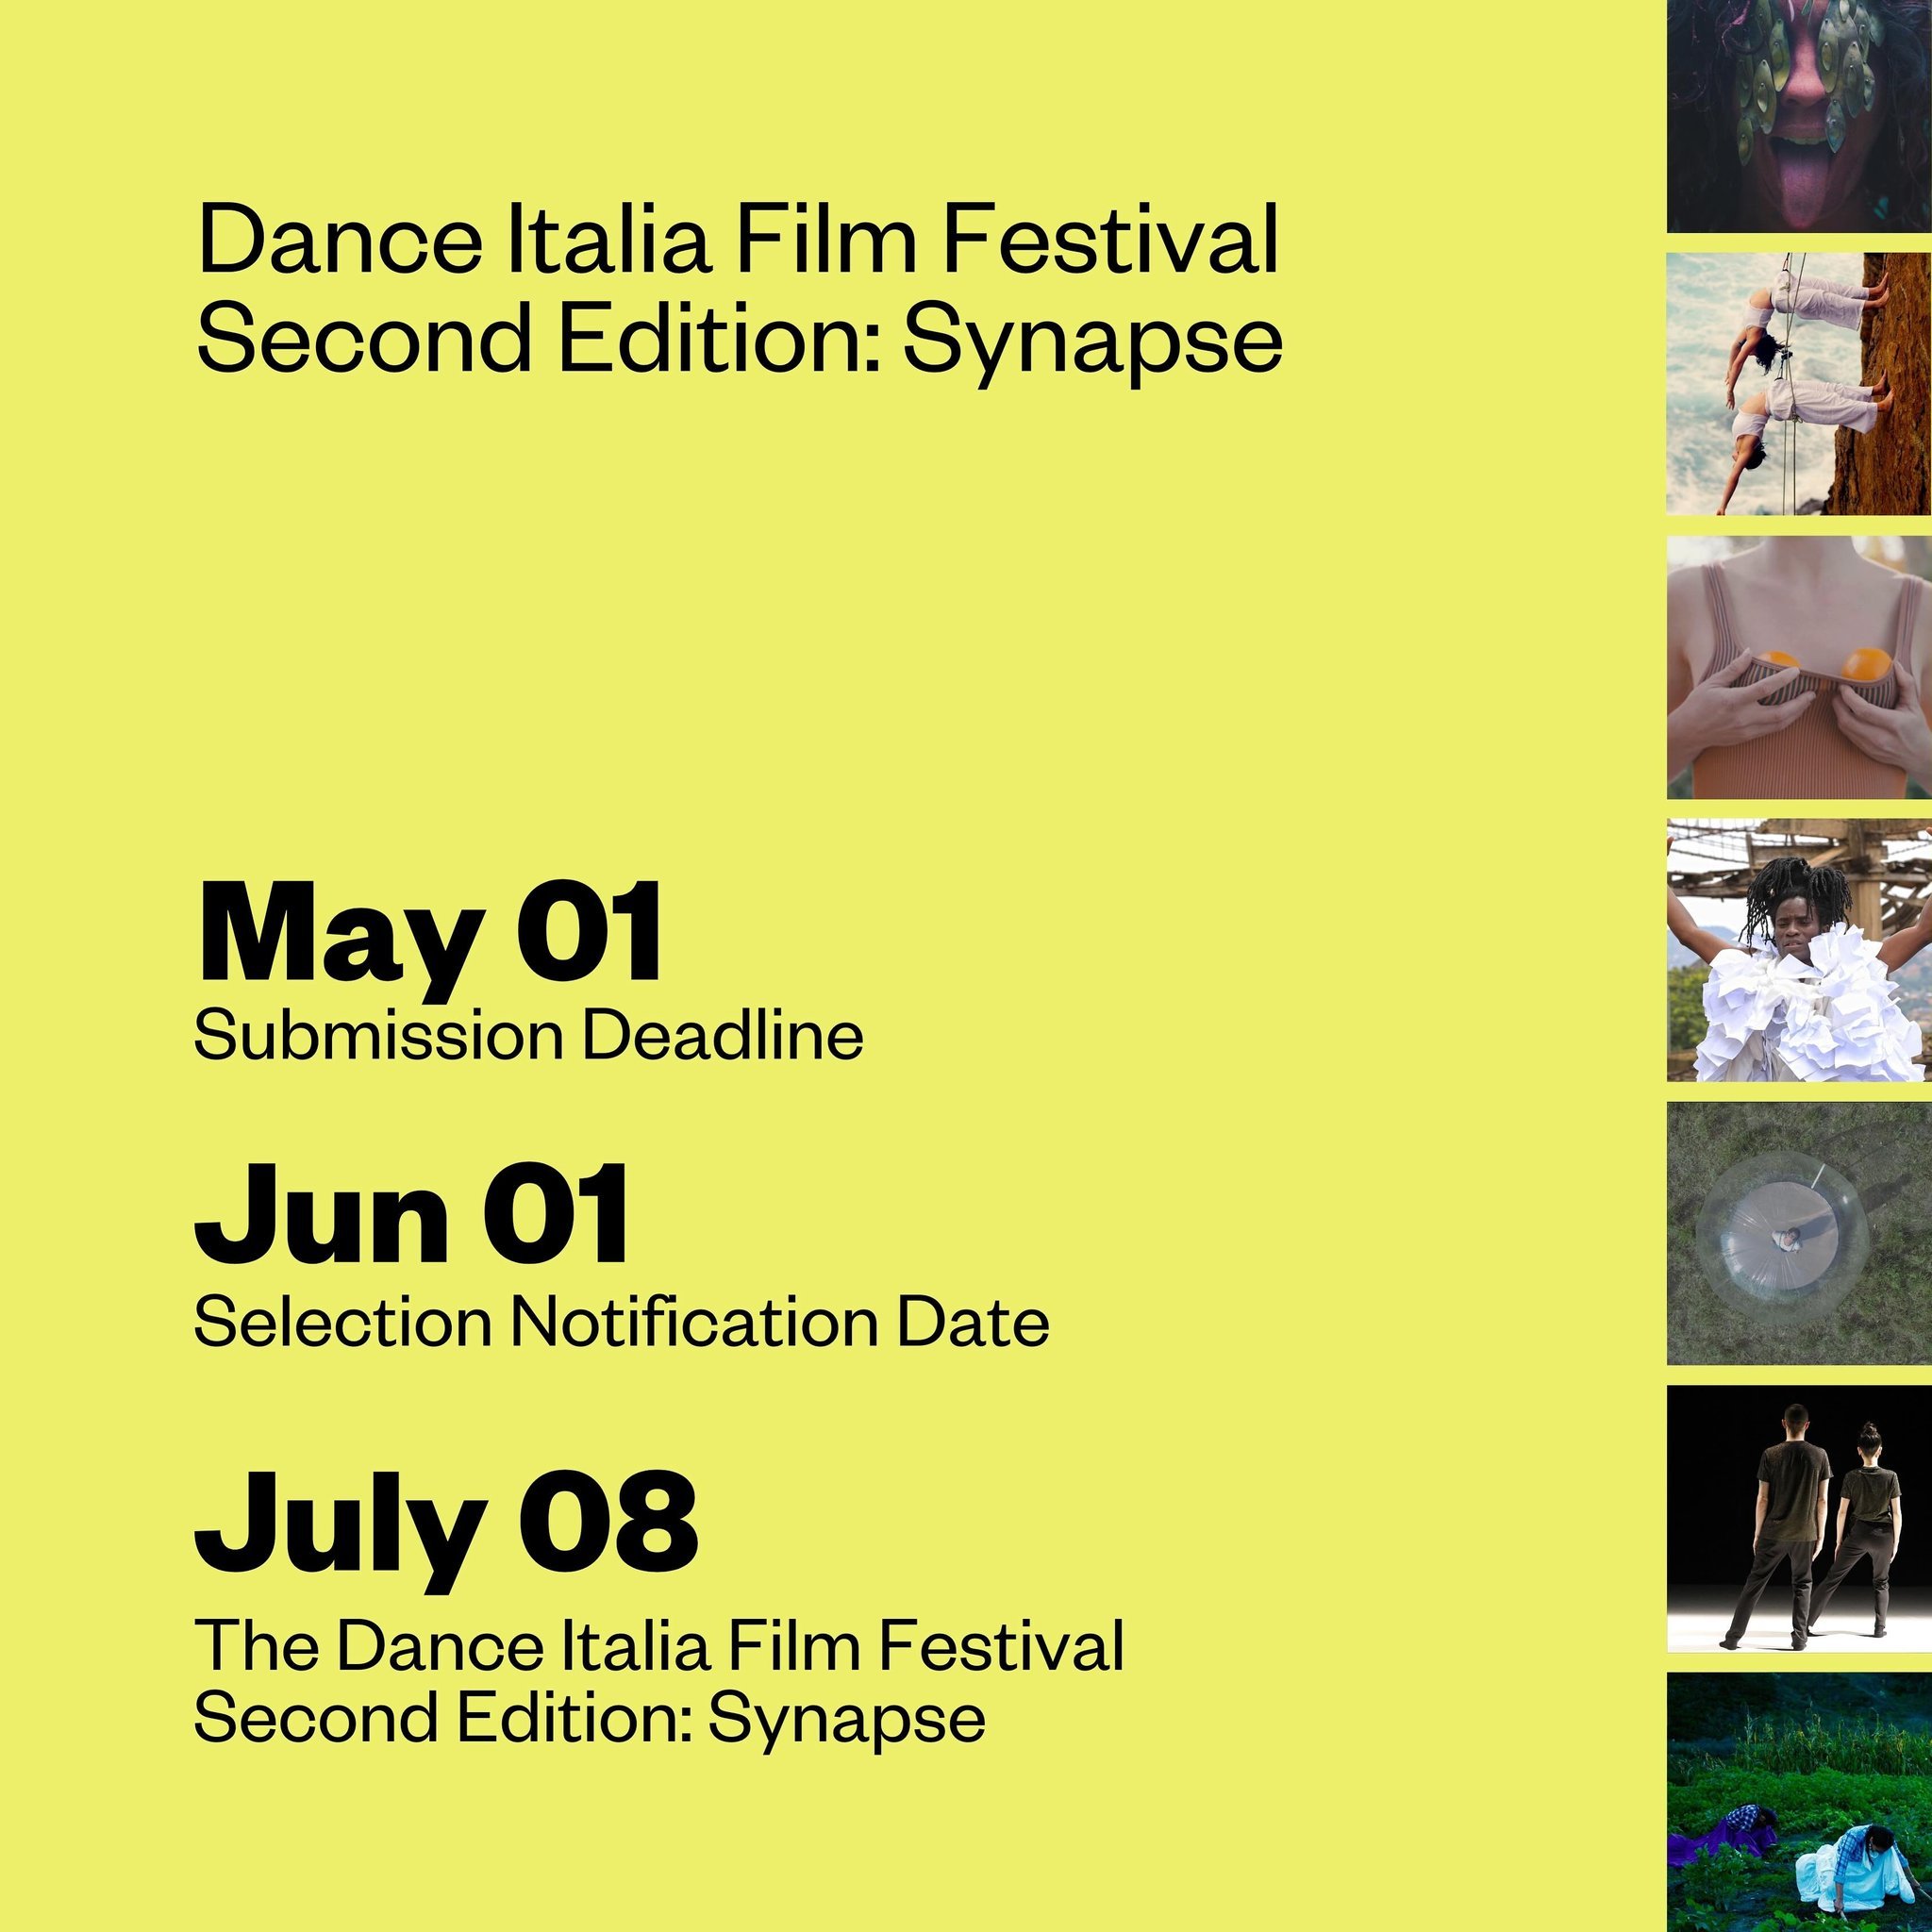 🚨 Only 1 more day to submit your work to our upcoming film festival*! 

Rules &amp; Terms

1. All dance films 15 minutes or less will be considered. We are interested in work that centers dance and movement as primary content.

2. Films must have be